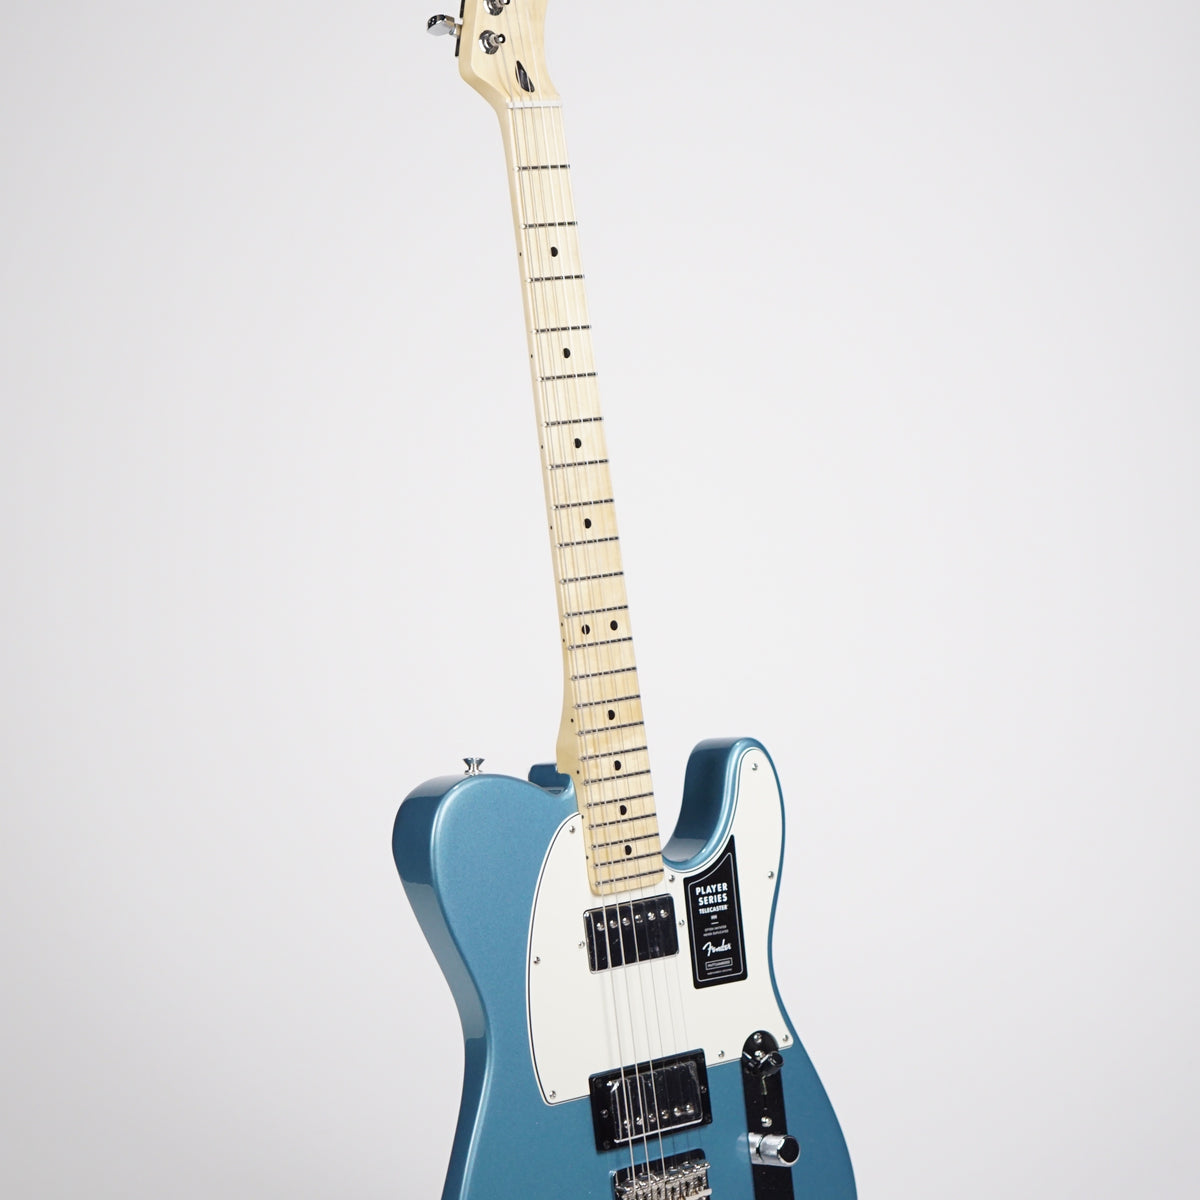 Fender Player Telecaster® HH, Maple Fingerboard, Tidepool